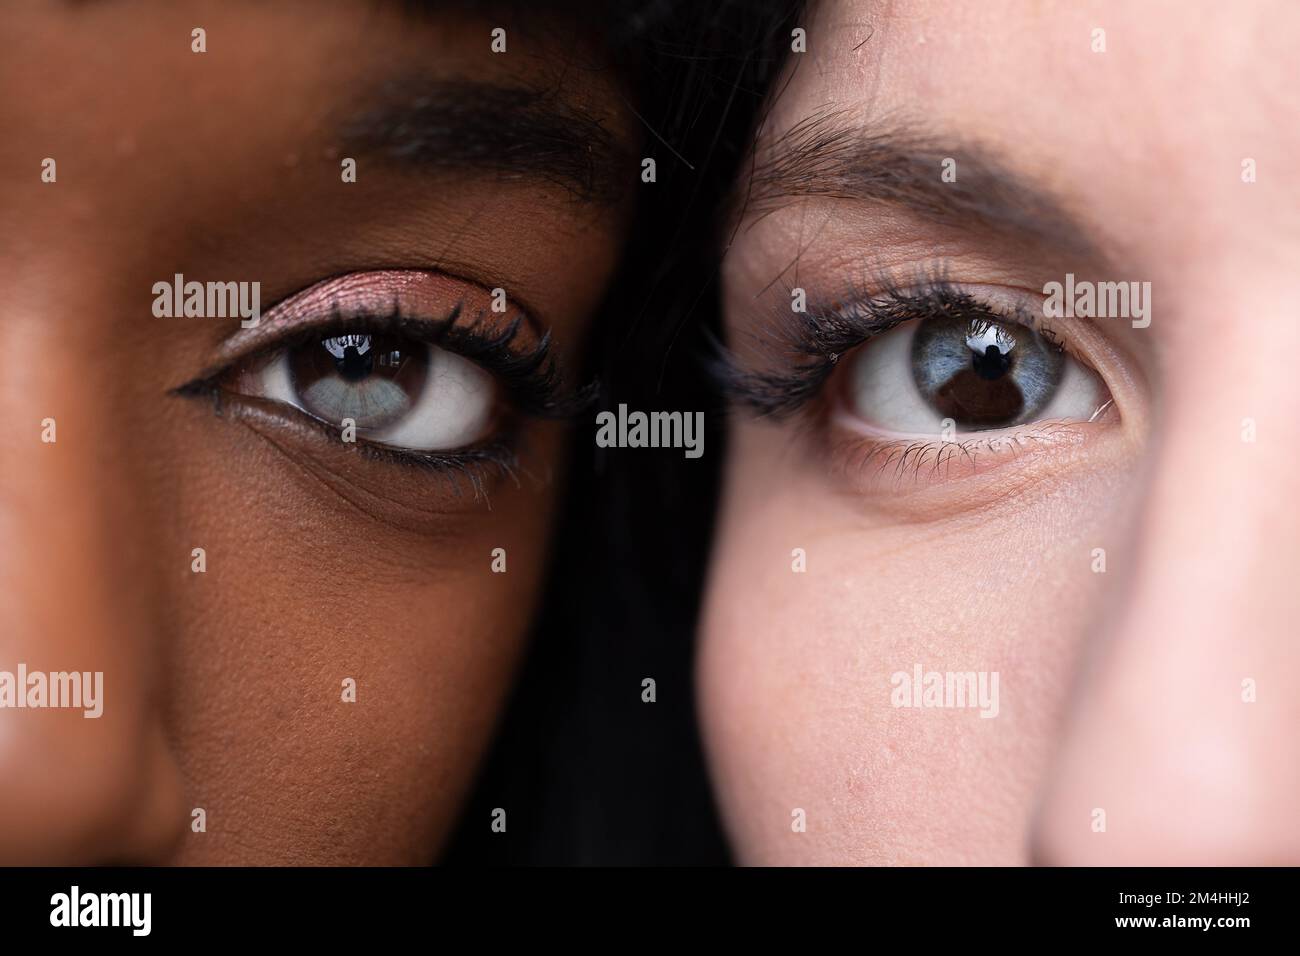 Heterochromia in light eye and dark eye. Caucasian and African complexion with chimeric phenomenon in the eyes with portions of different colors Stock Photo